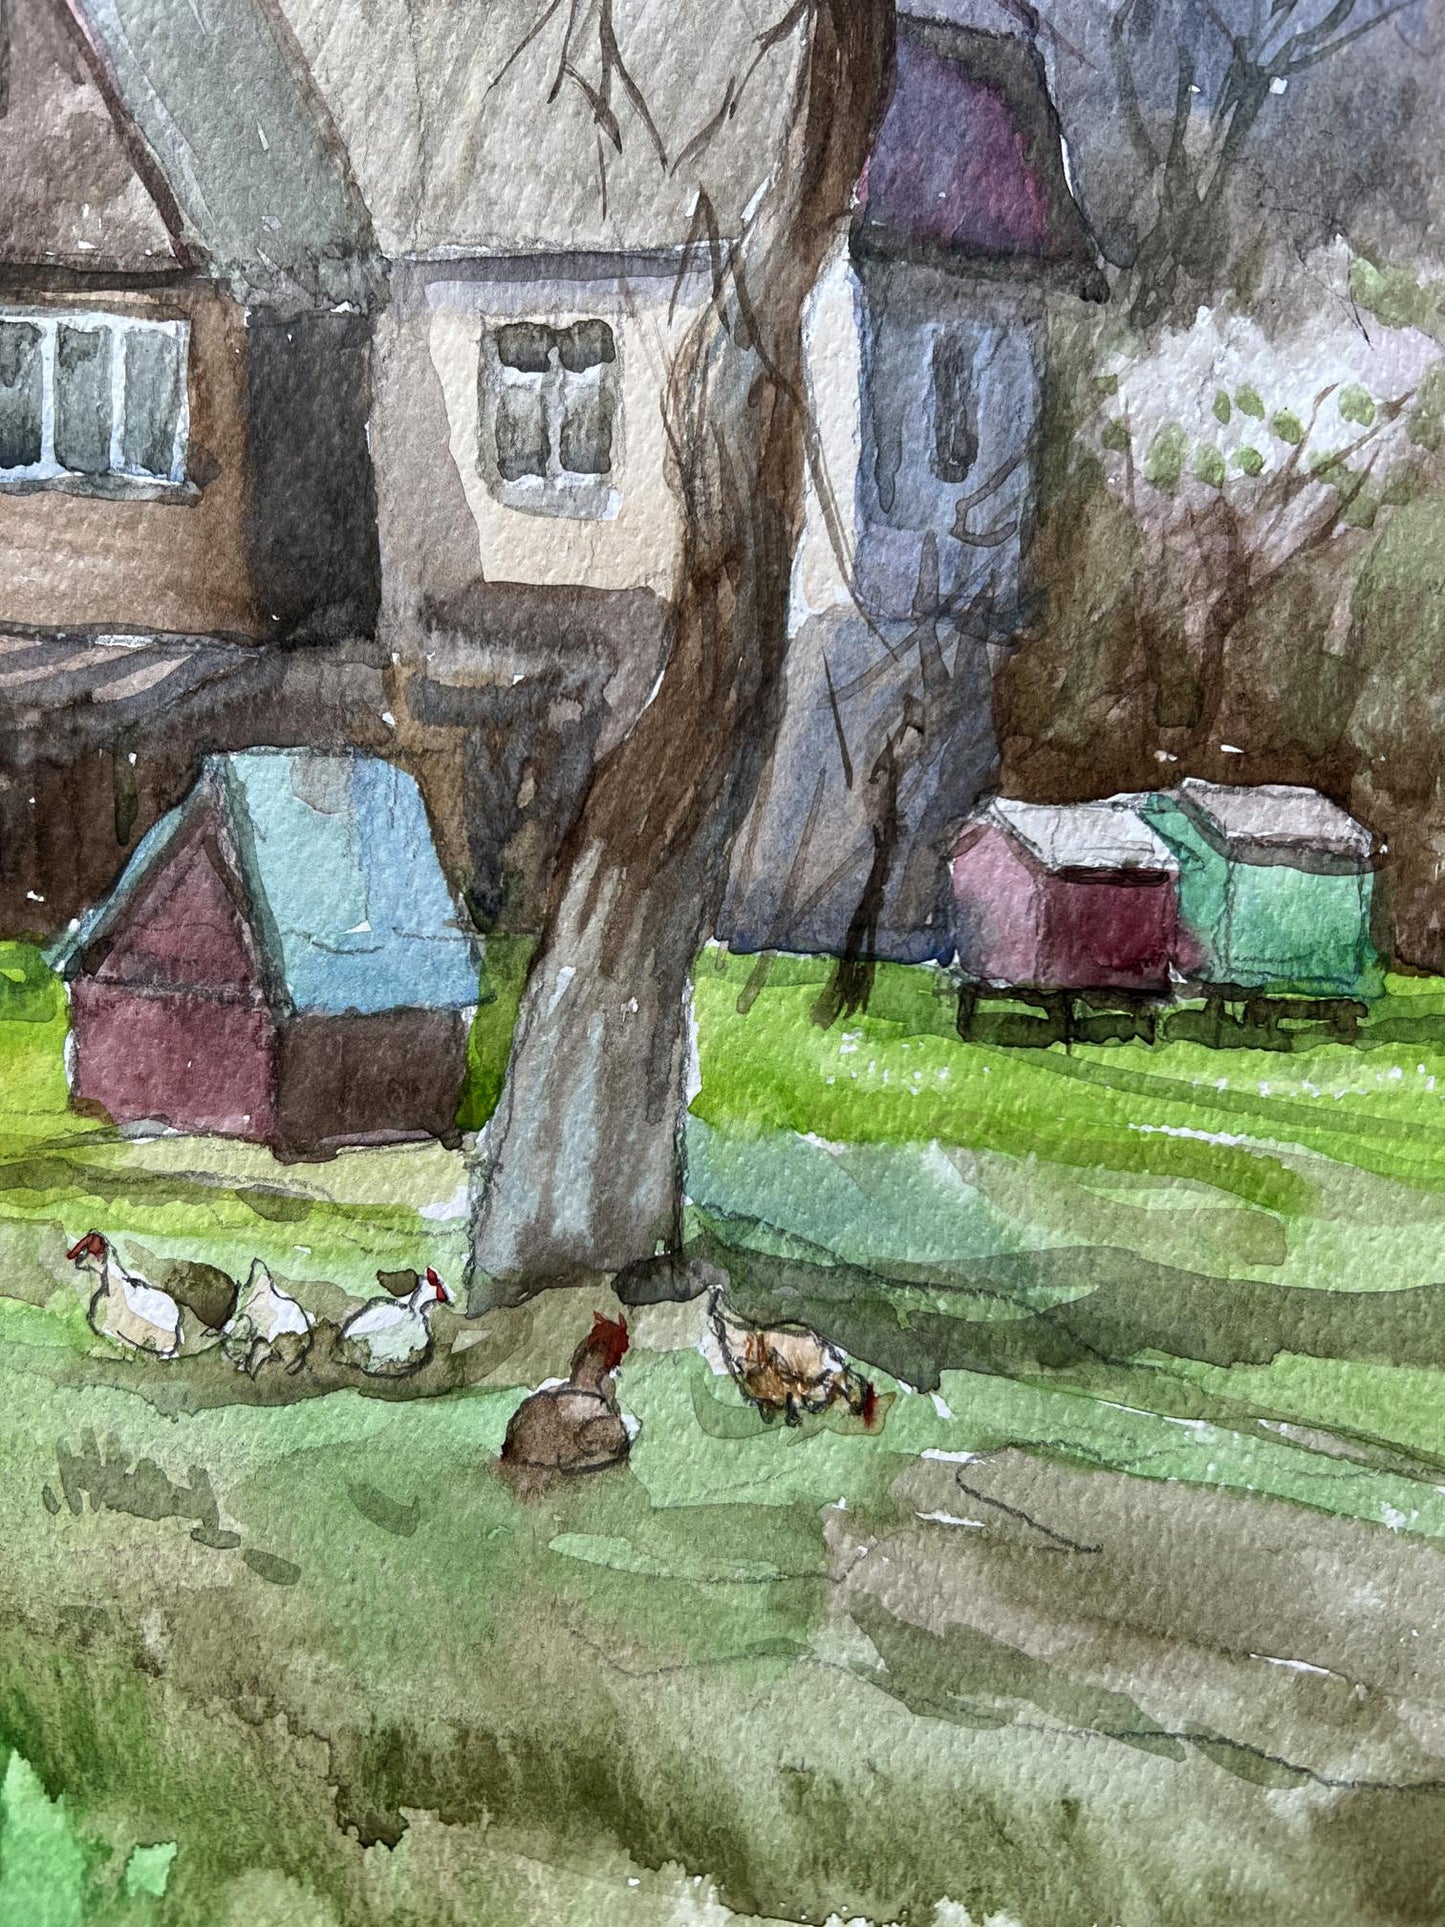 Watercolor painting The yard of the house V. Mishurovsky